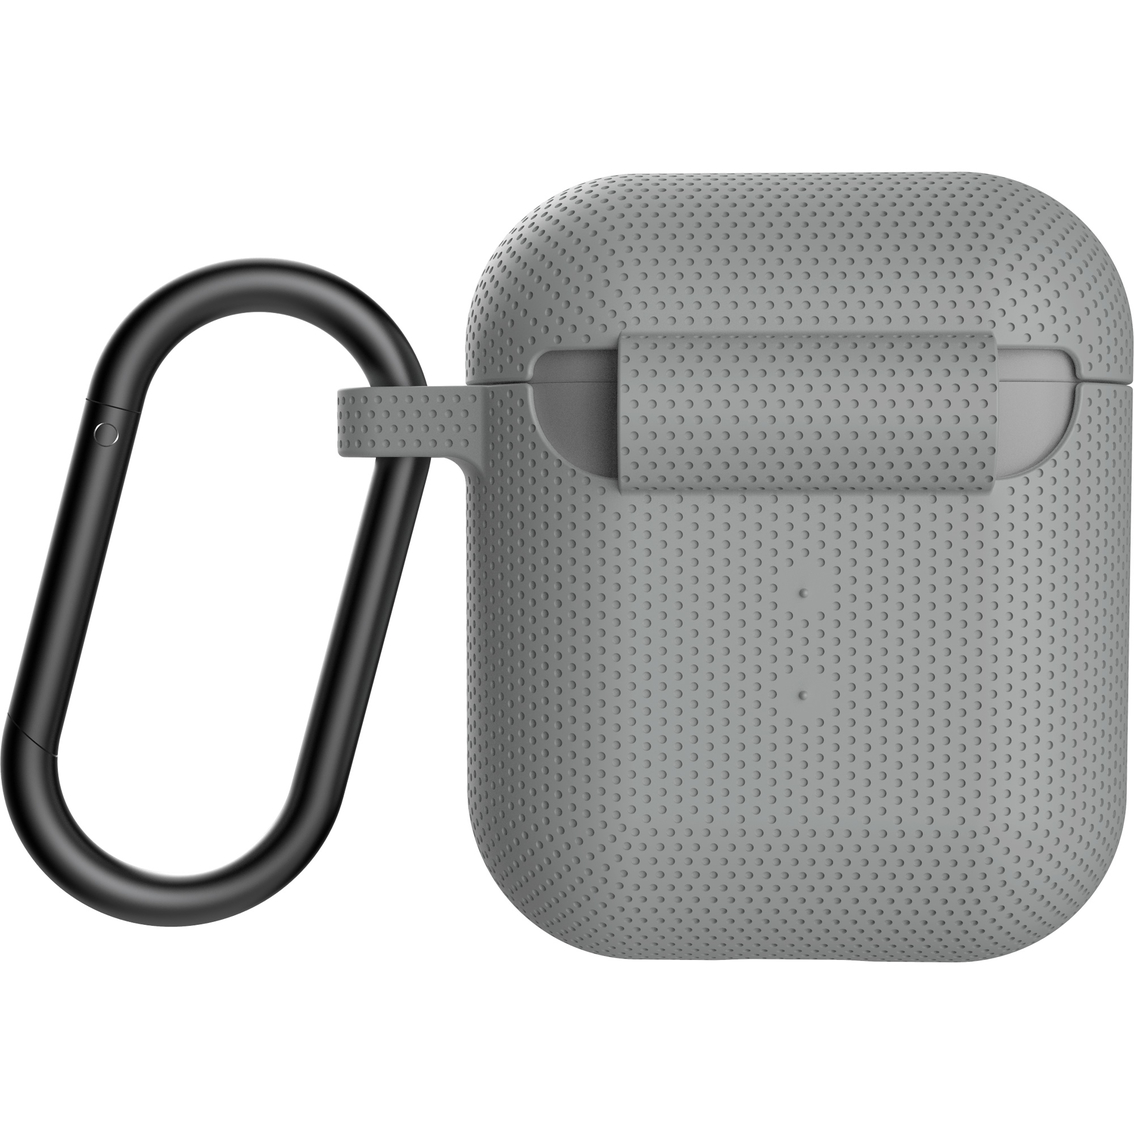 U by UAG Silicone Case for Apple AirPods - Image 2 of 4